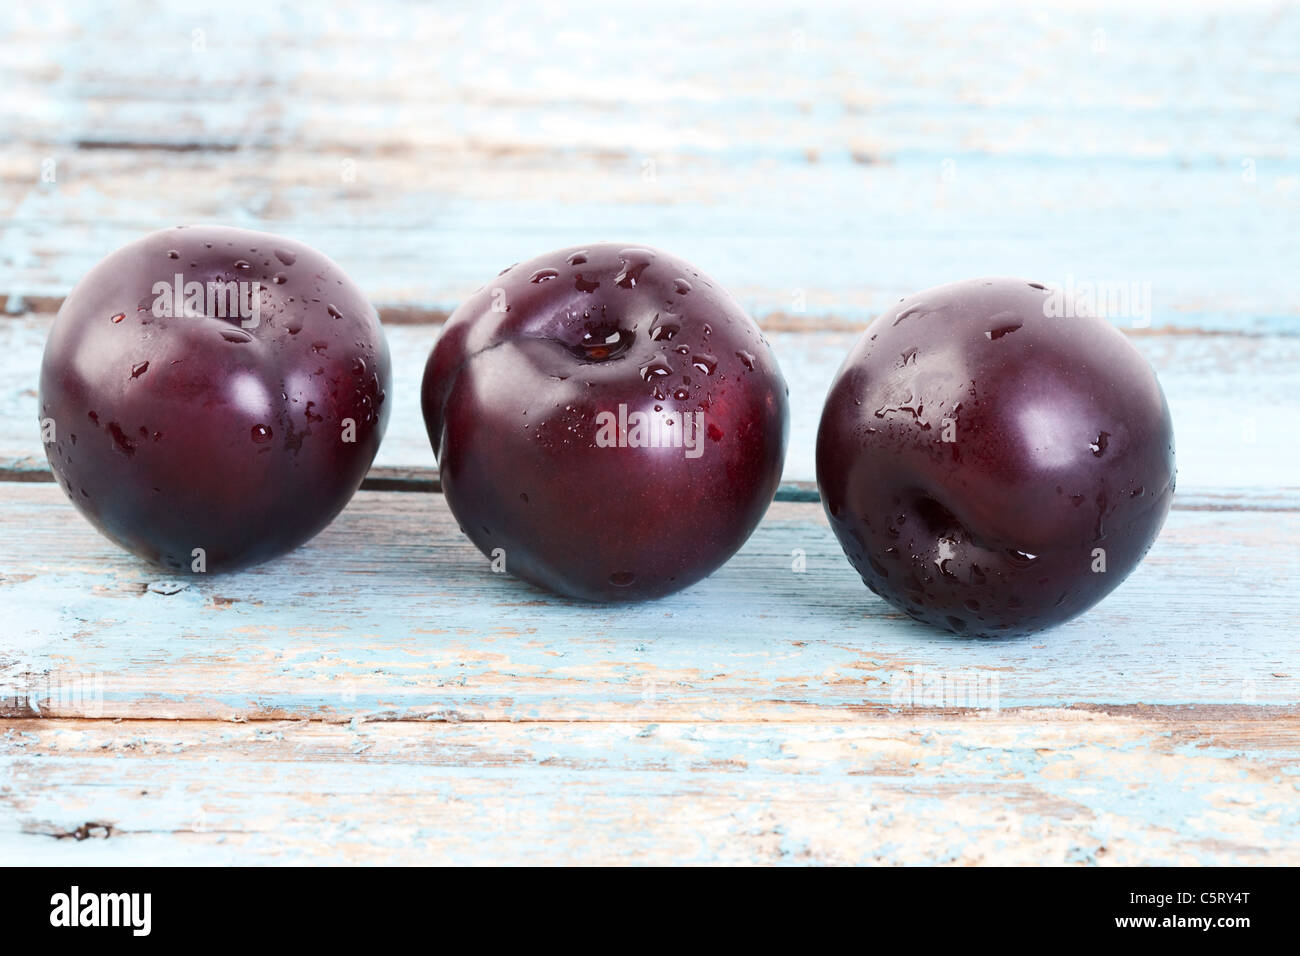 Three plums on wooden table, close up Stock Photo